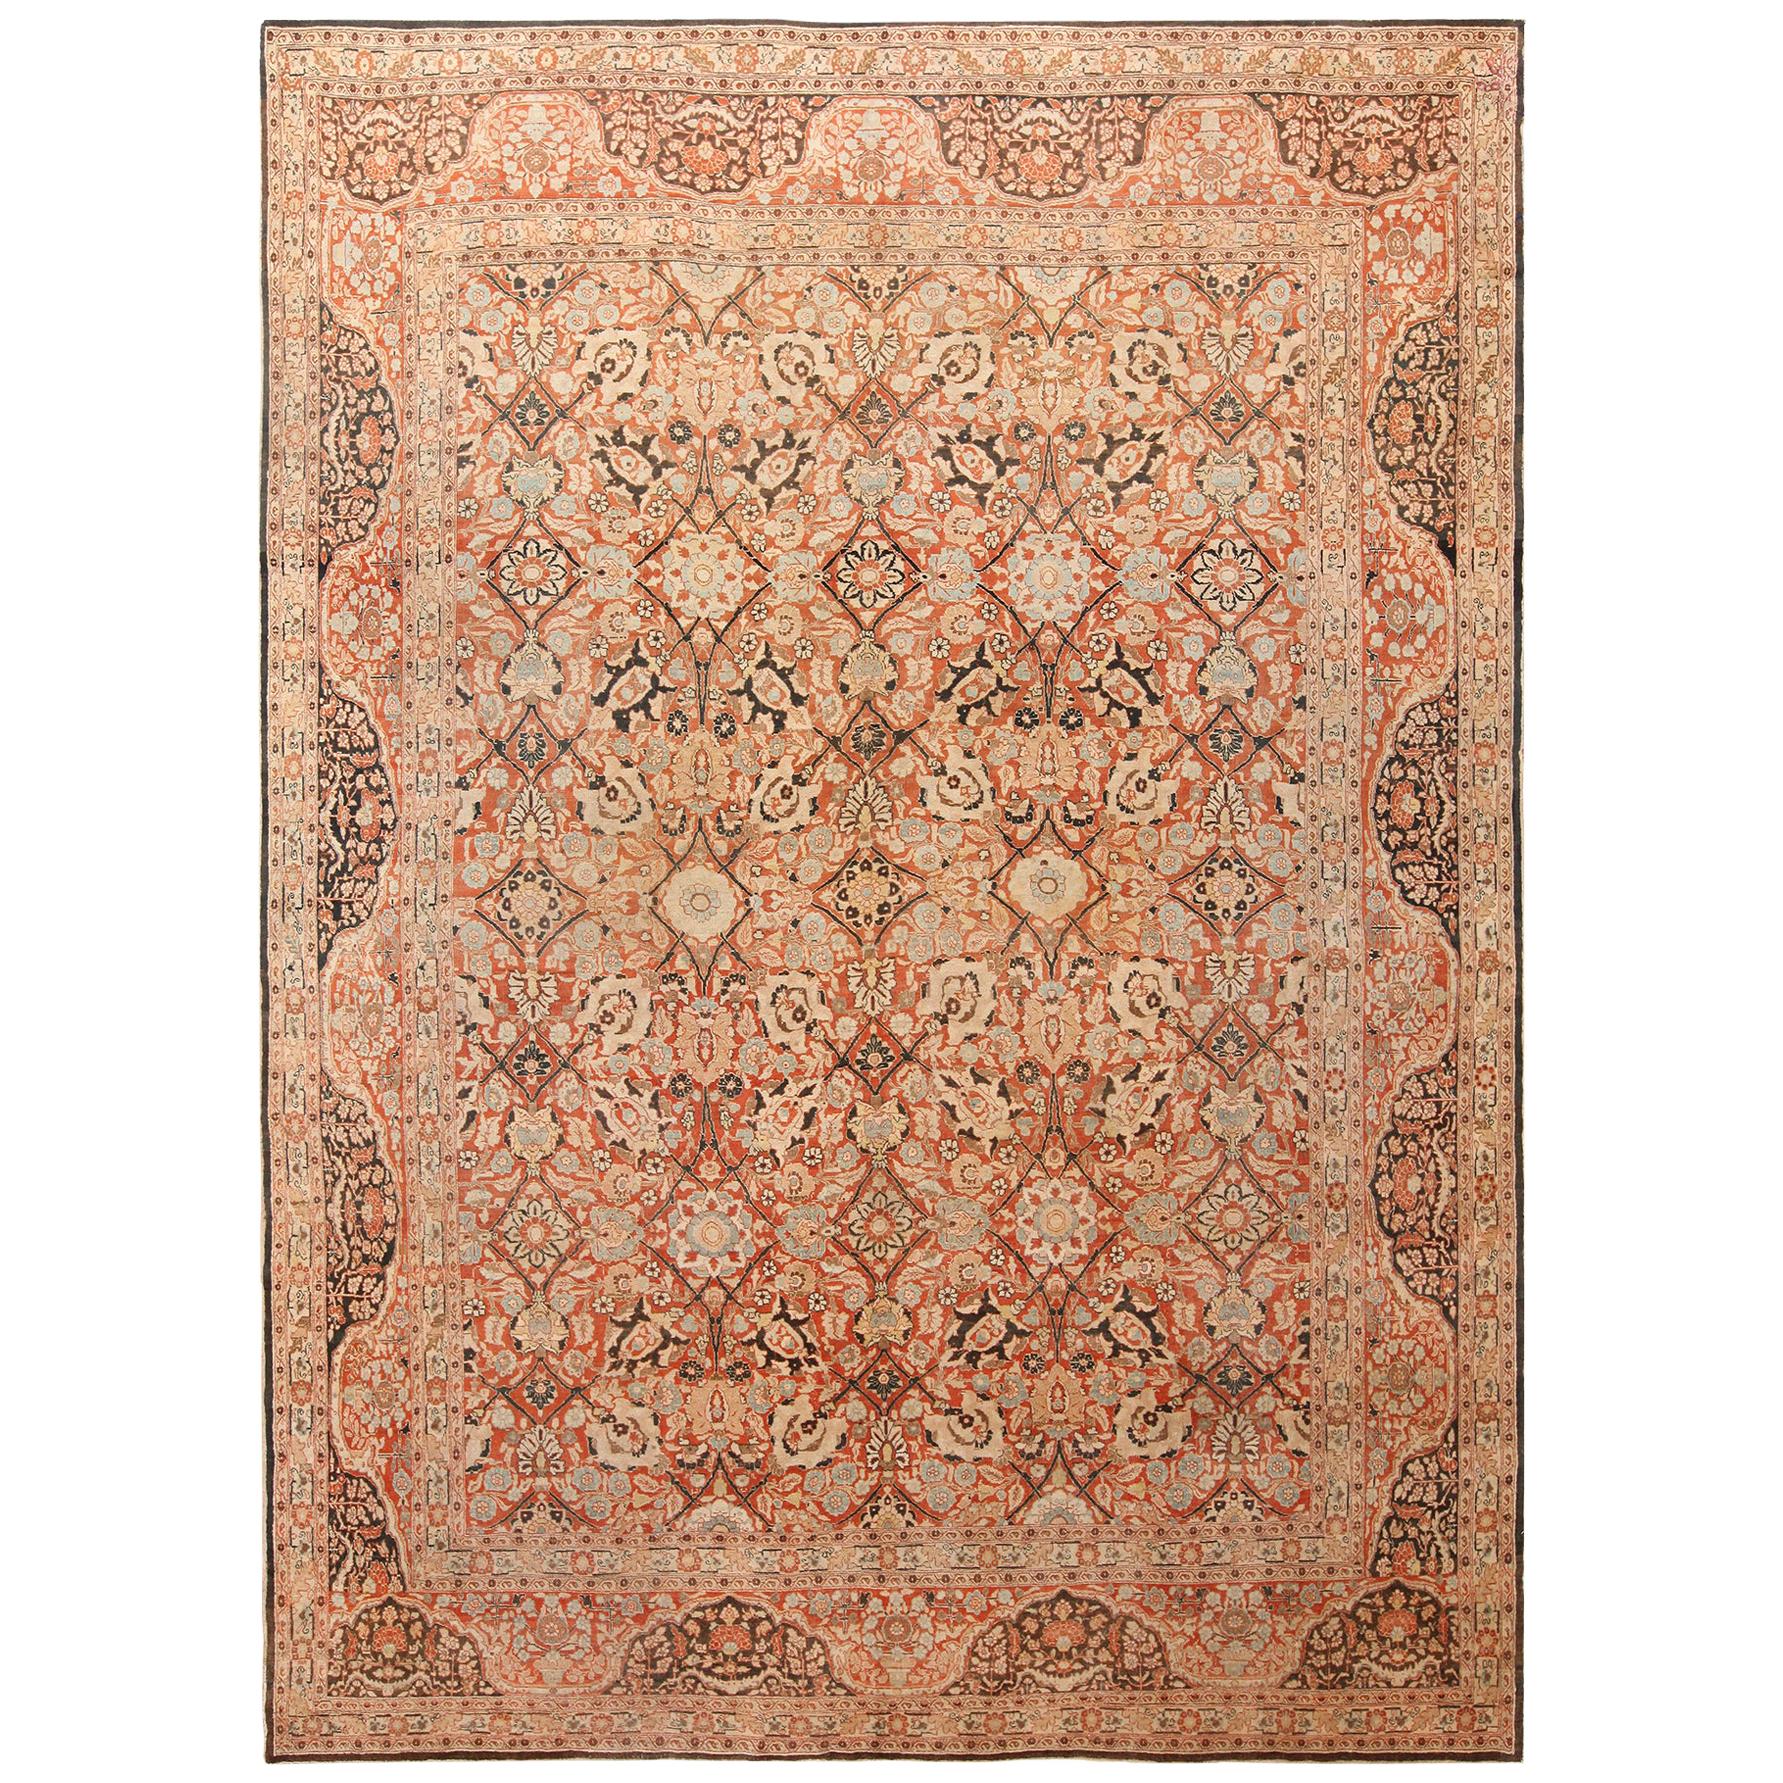 Antique Persian Tabriz Rug. Size: 9 ft. 3 in x 13 ft. 2 in For Sale